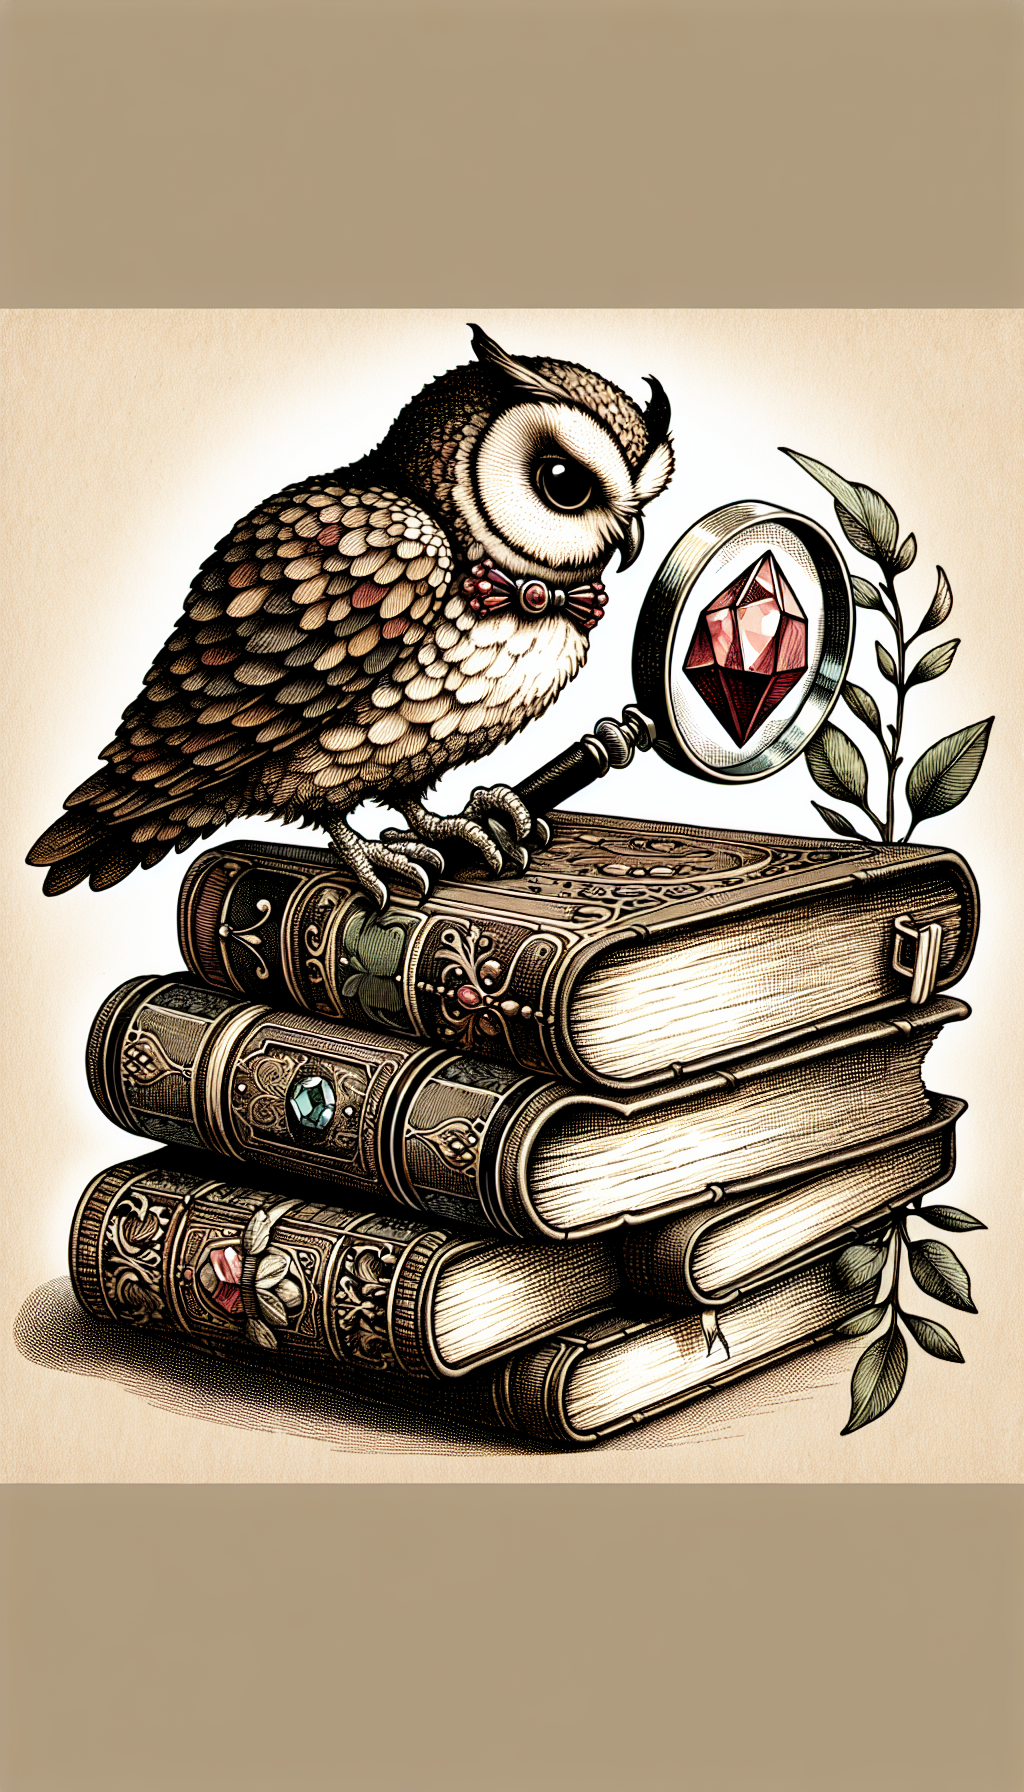 A whimsical illustration depicting a bespectacled owl perched atop a pile of antique books, peering through a magnifying glass at a shimmering, jewel-like tome nestled within the stack. Inked in sepia tones with dashes of jewel colors, the image marries vintage charm with the allure of hidden treasures, symbolizing the quest to discover valuable old books.